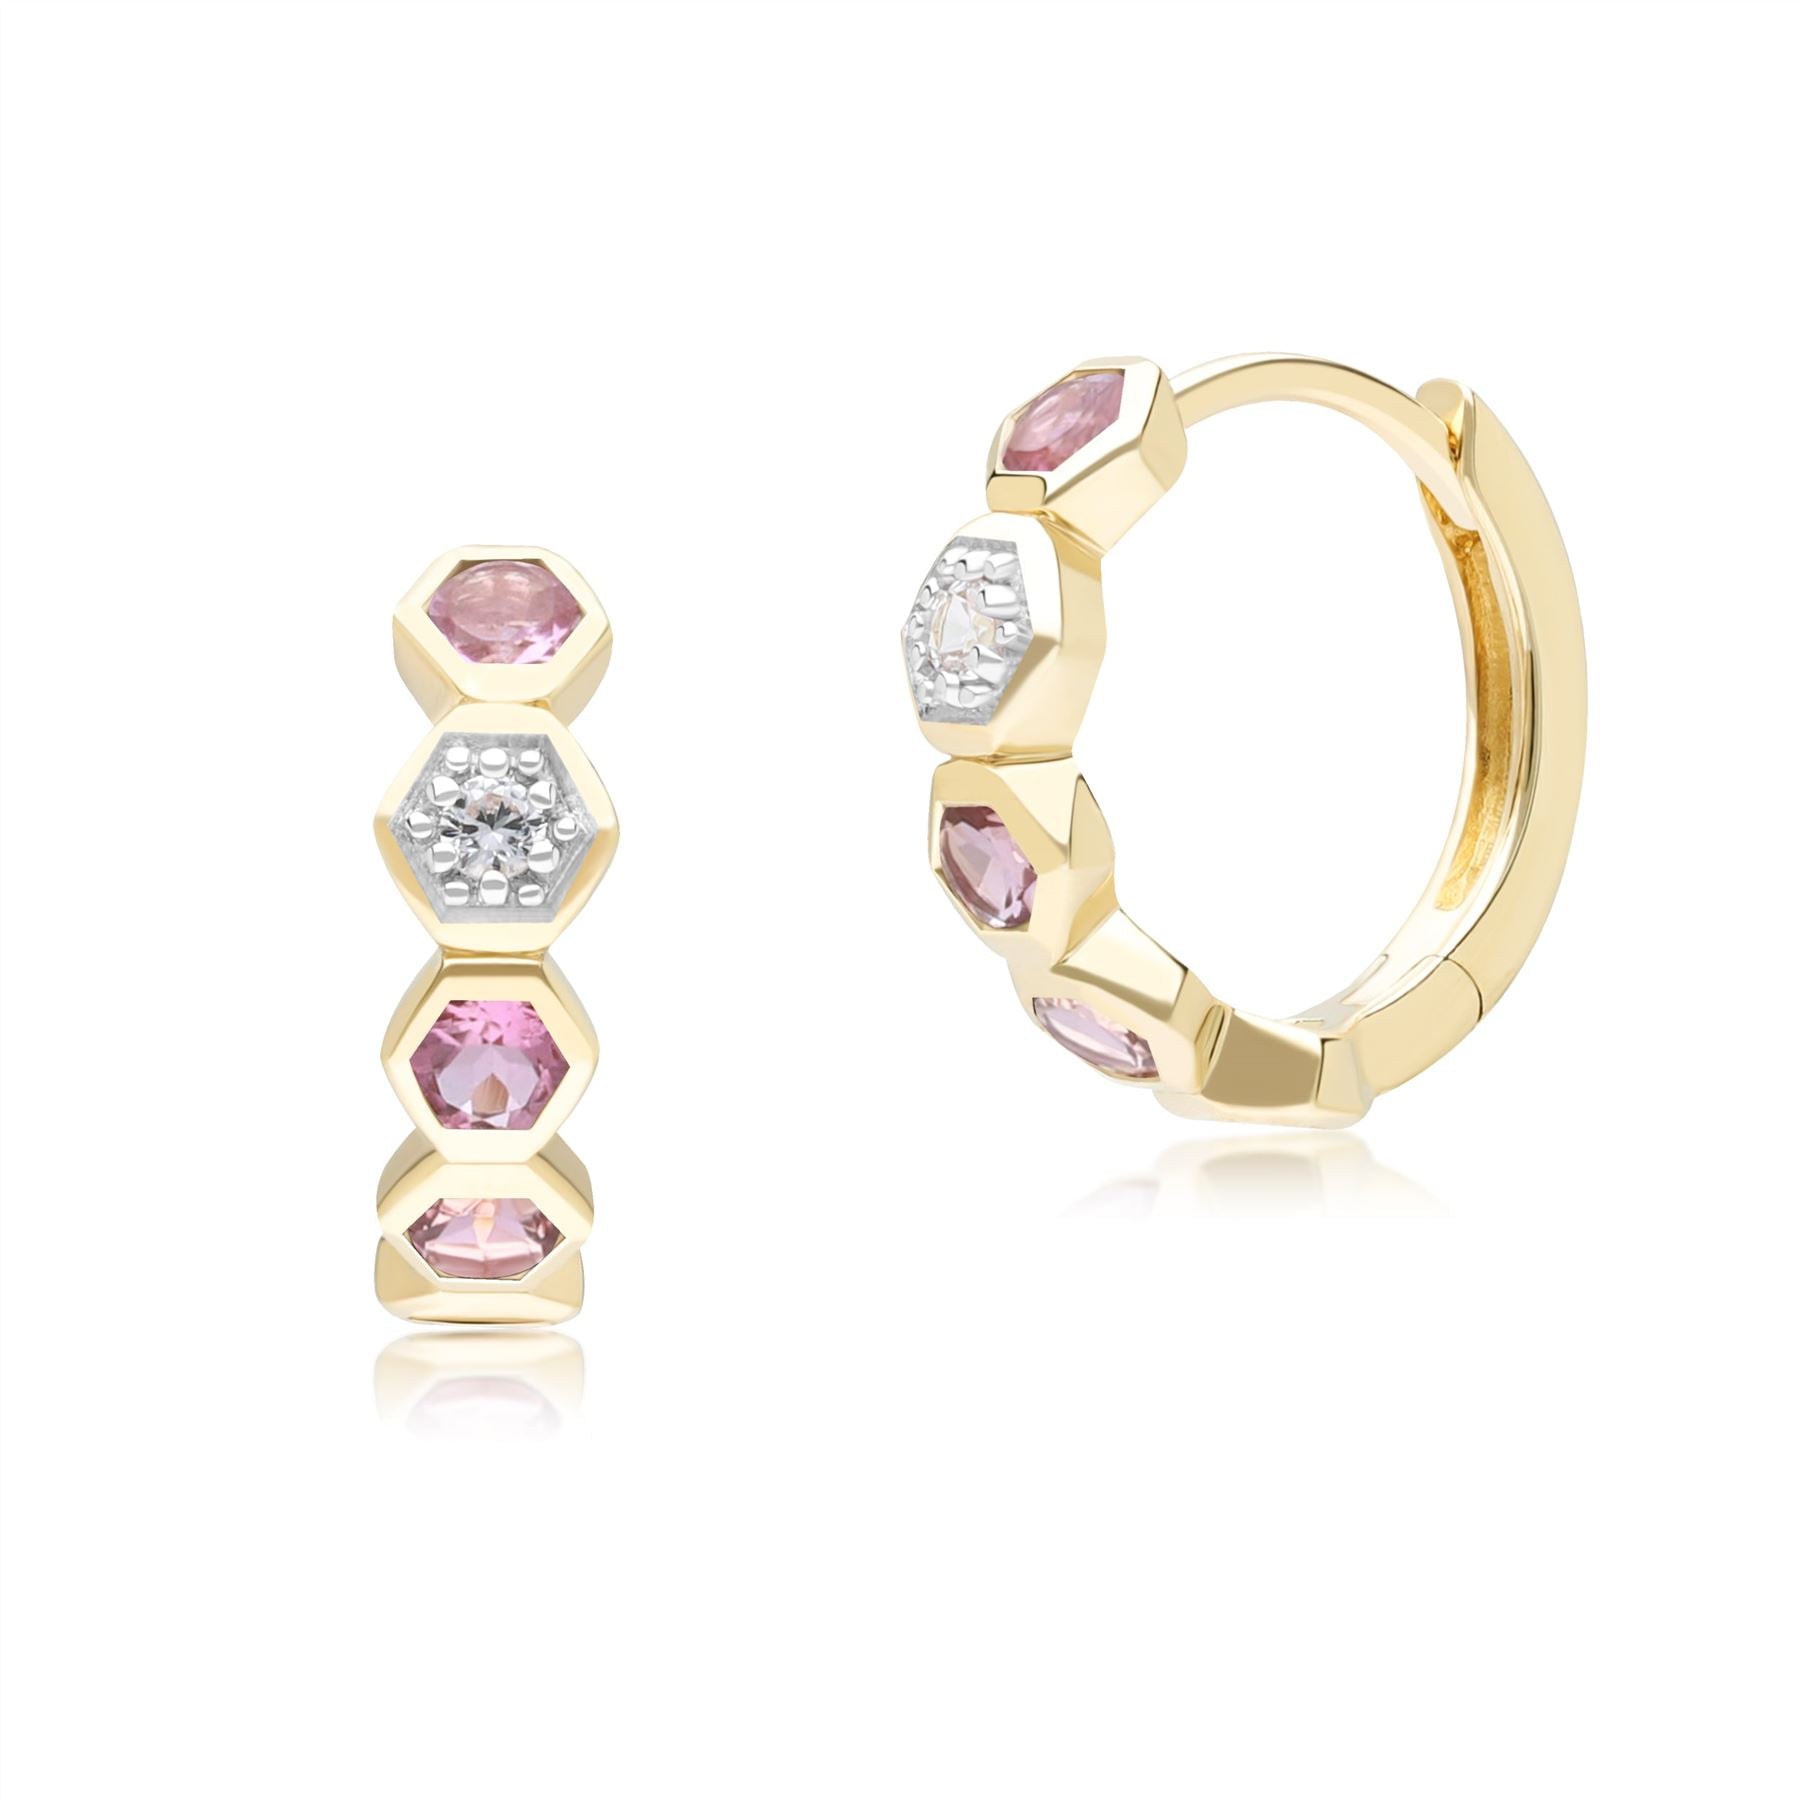 Image of Geometric Round Pink Tourmaline and Sapphire Hoop Earrings in 9ct Yellow Gold